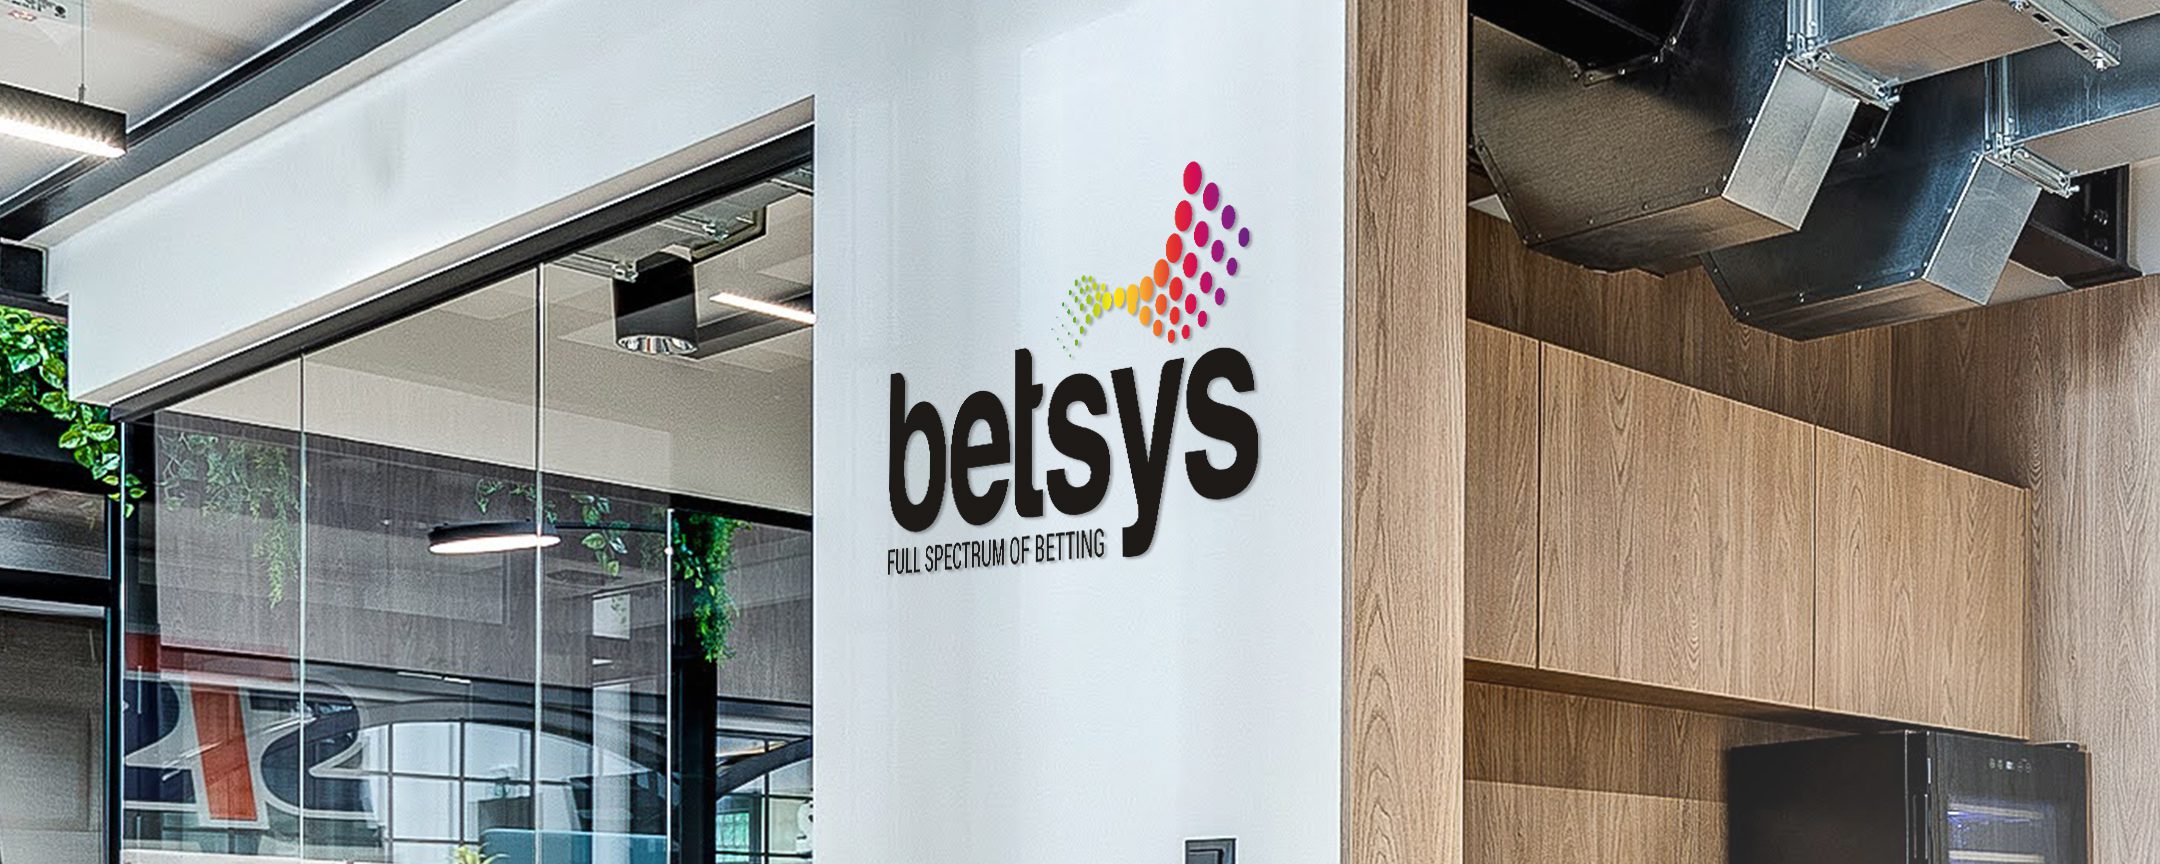 News - Acquisition of Betsys and investments in technology - Przejęcie Betsys i inwestycja w technologię